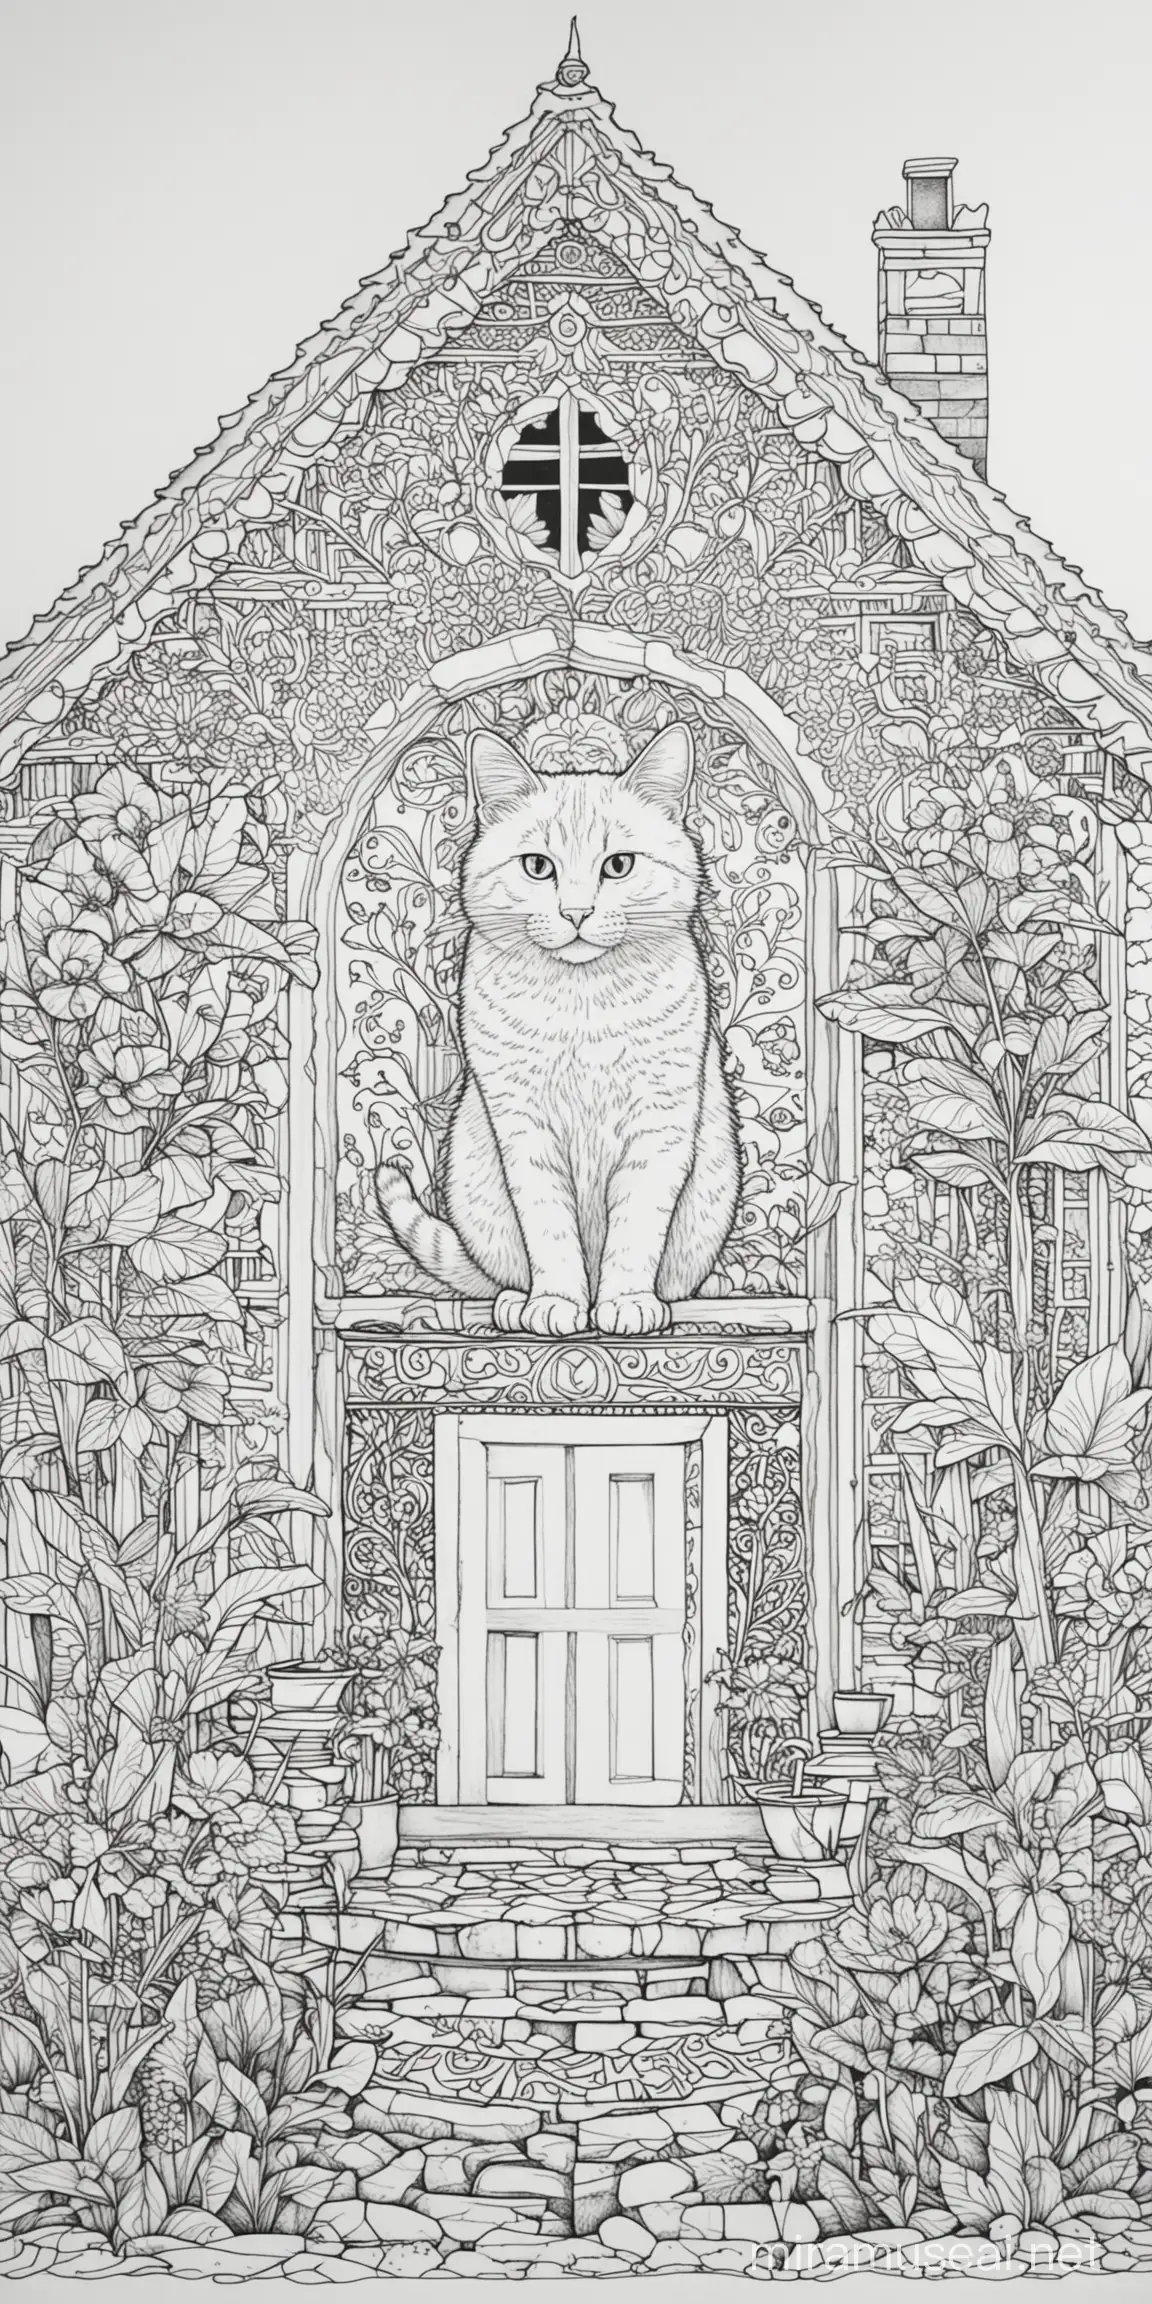 Mandala Coloring Page for Adults with a Serene Cat and Vintage House Design